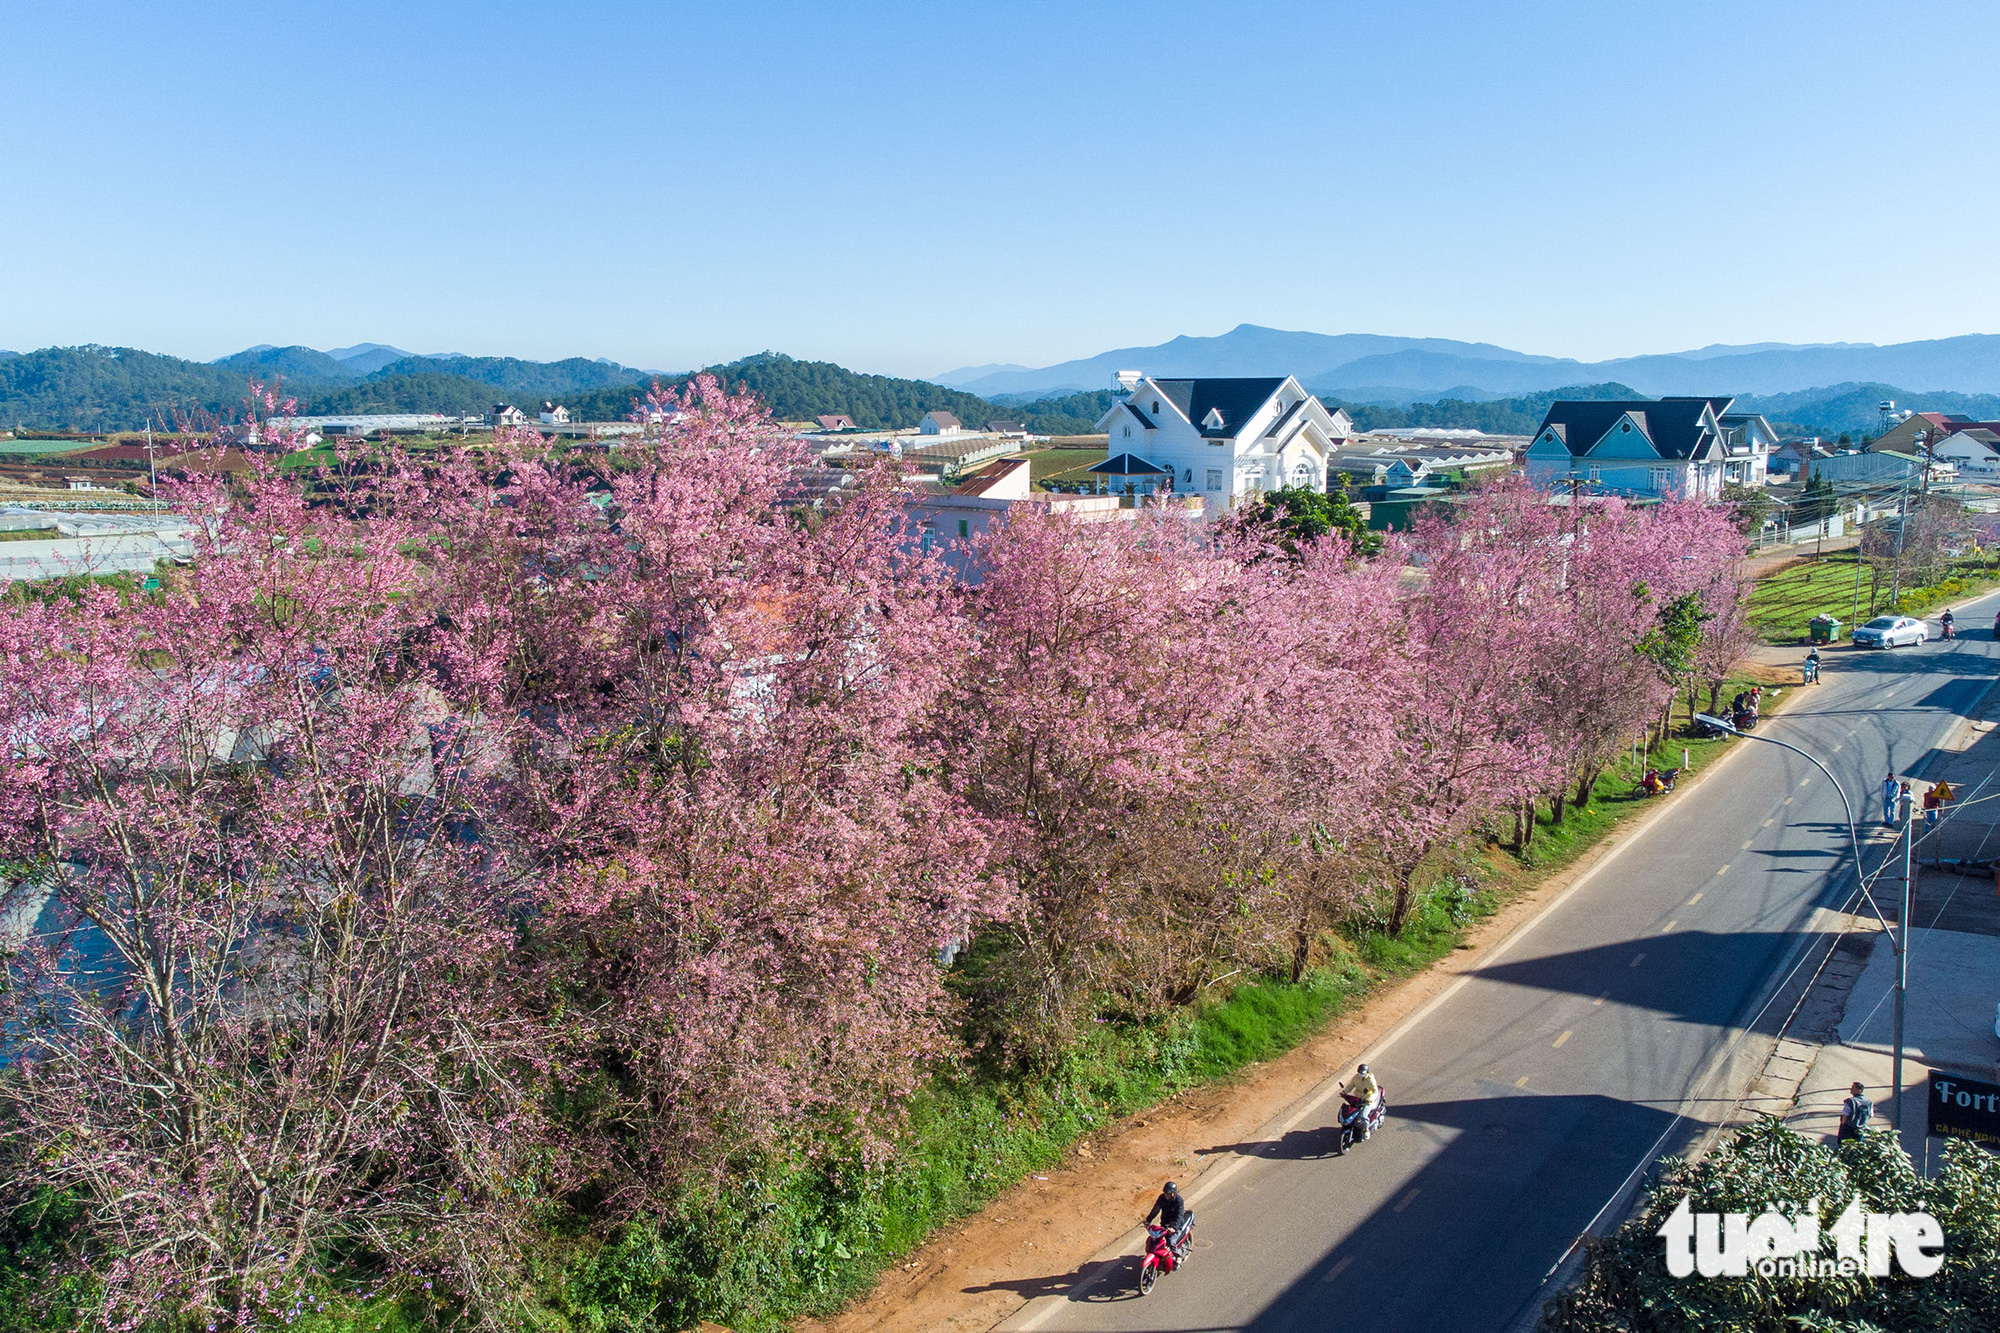 Blooming apricot trees along a street in Da Lat City, Lam Dong Province, Vietnam. Photo: Tuoi Tre